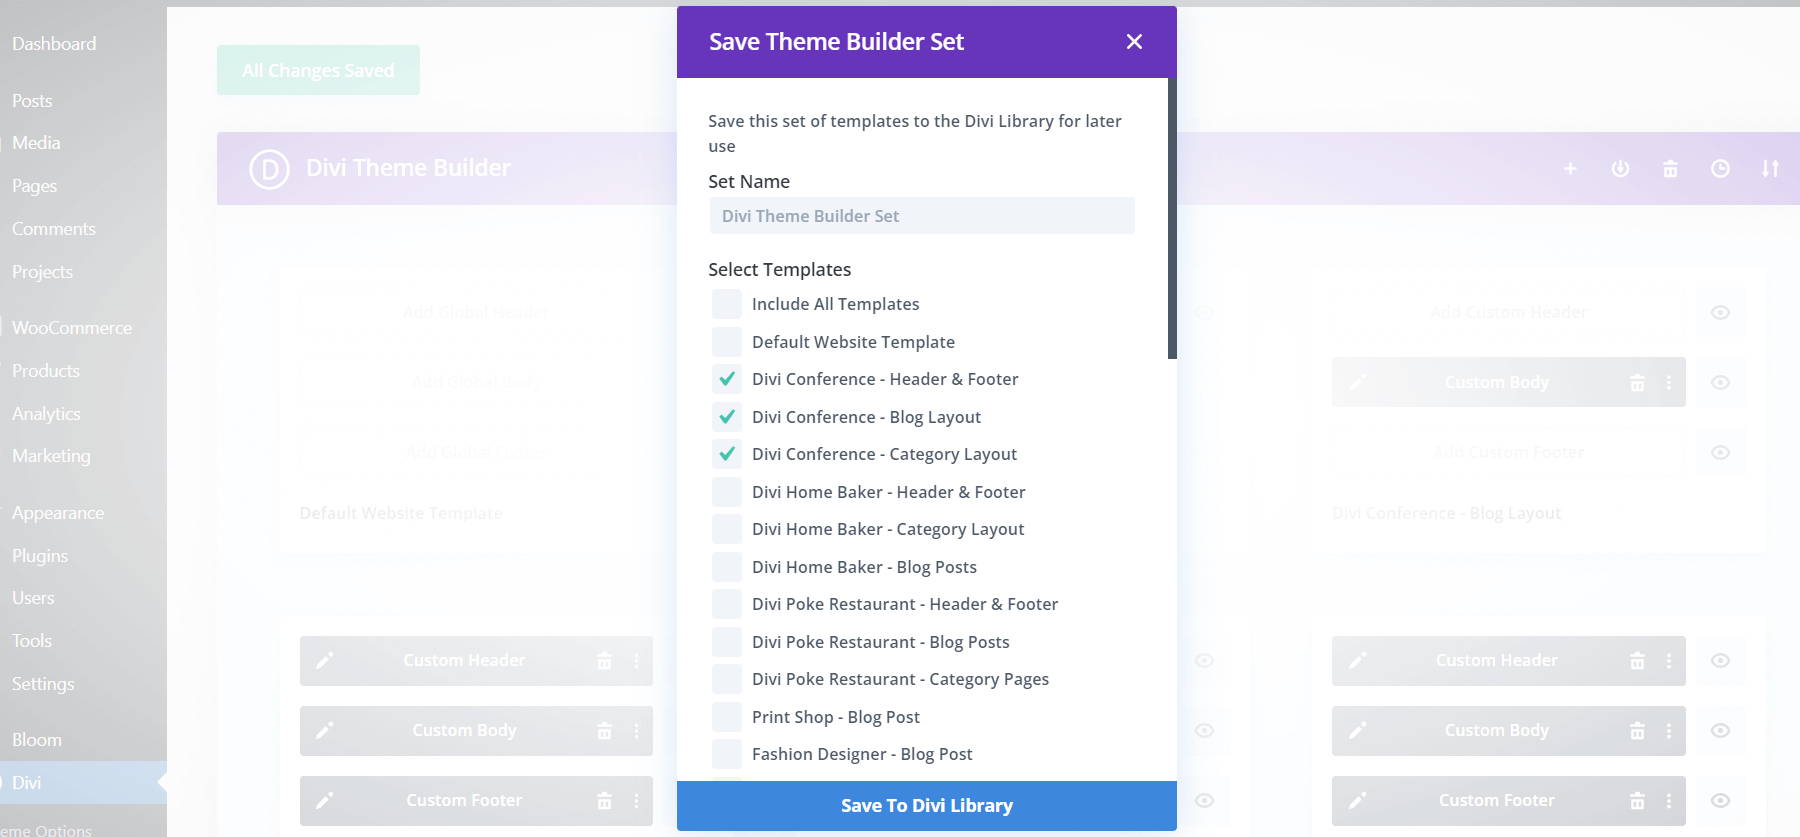 Exporting and saving Theme Builder Sets within the Divi Theme Builder Library